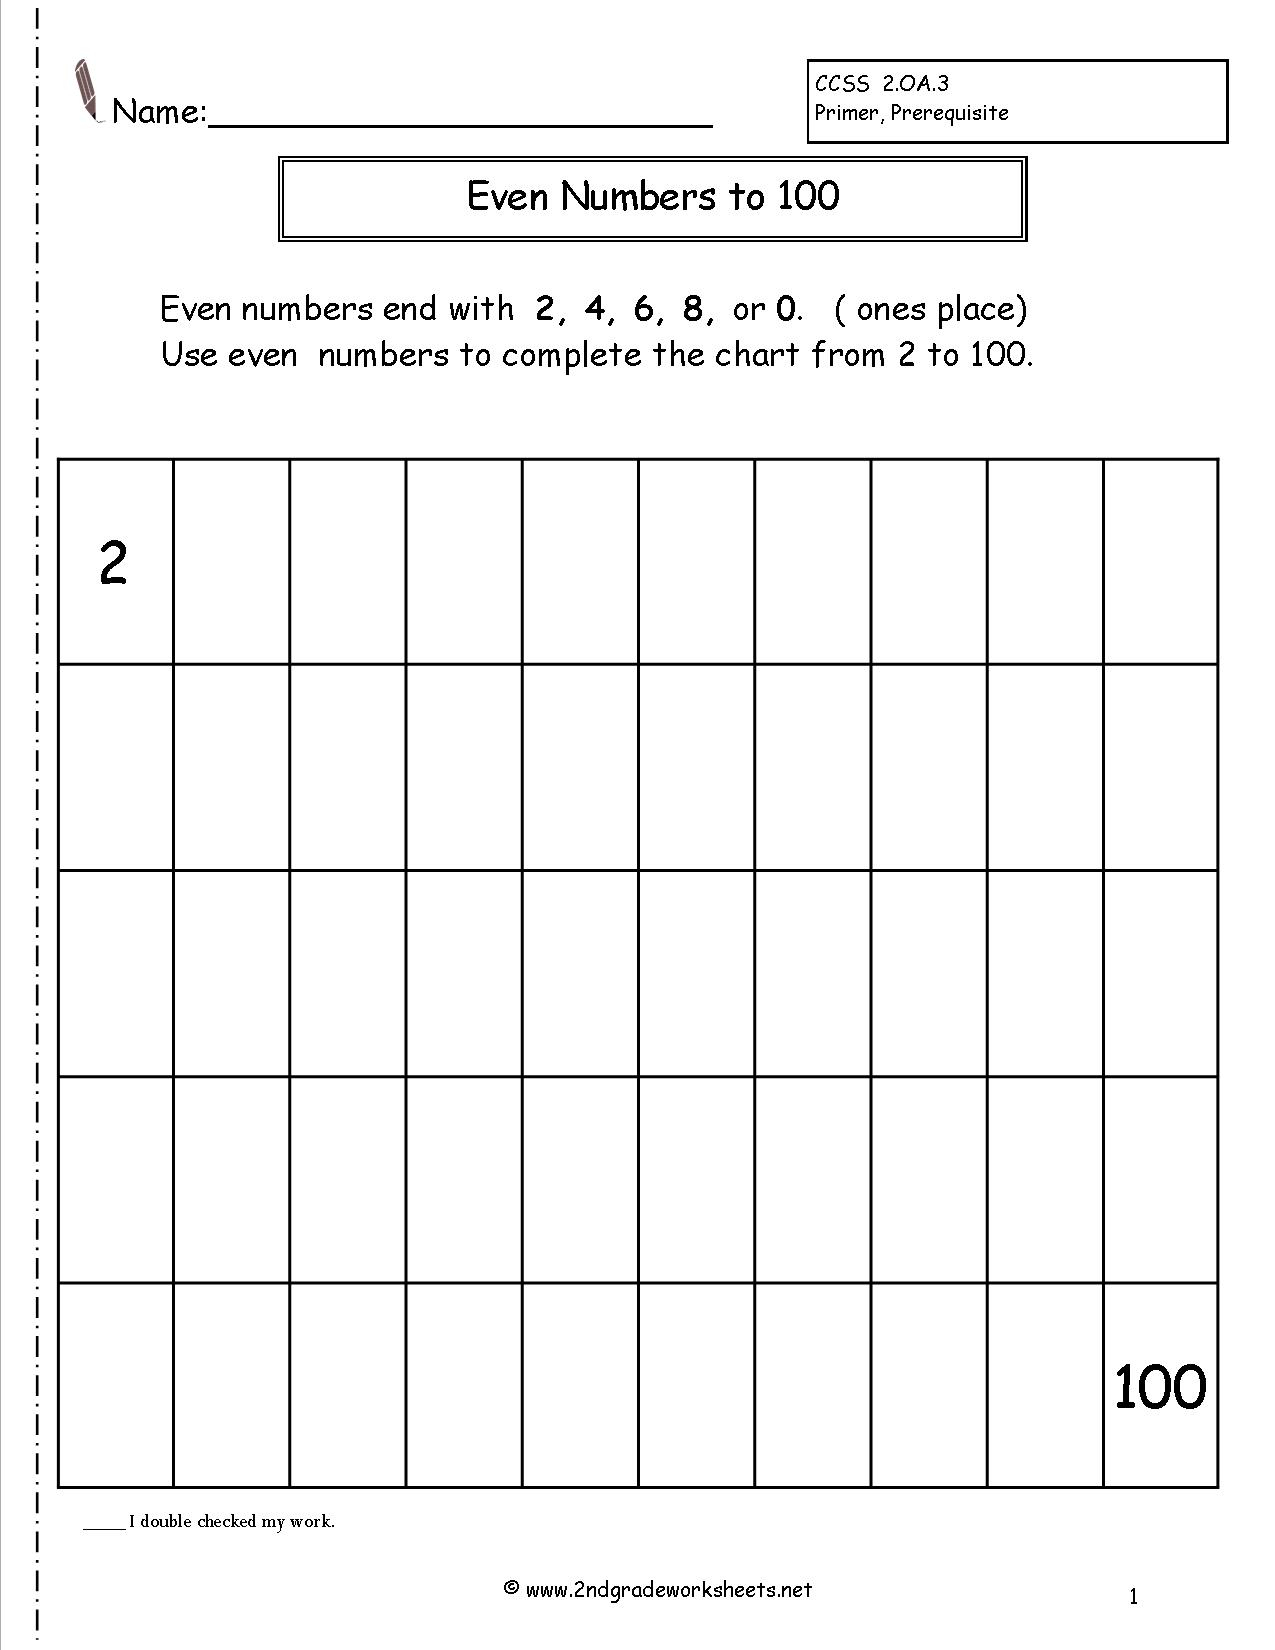 Even And Odd Numbers Worksheets | Odd And Even Printable Worksheets